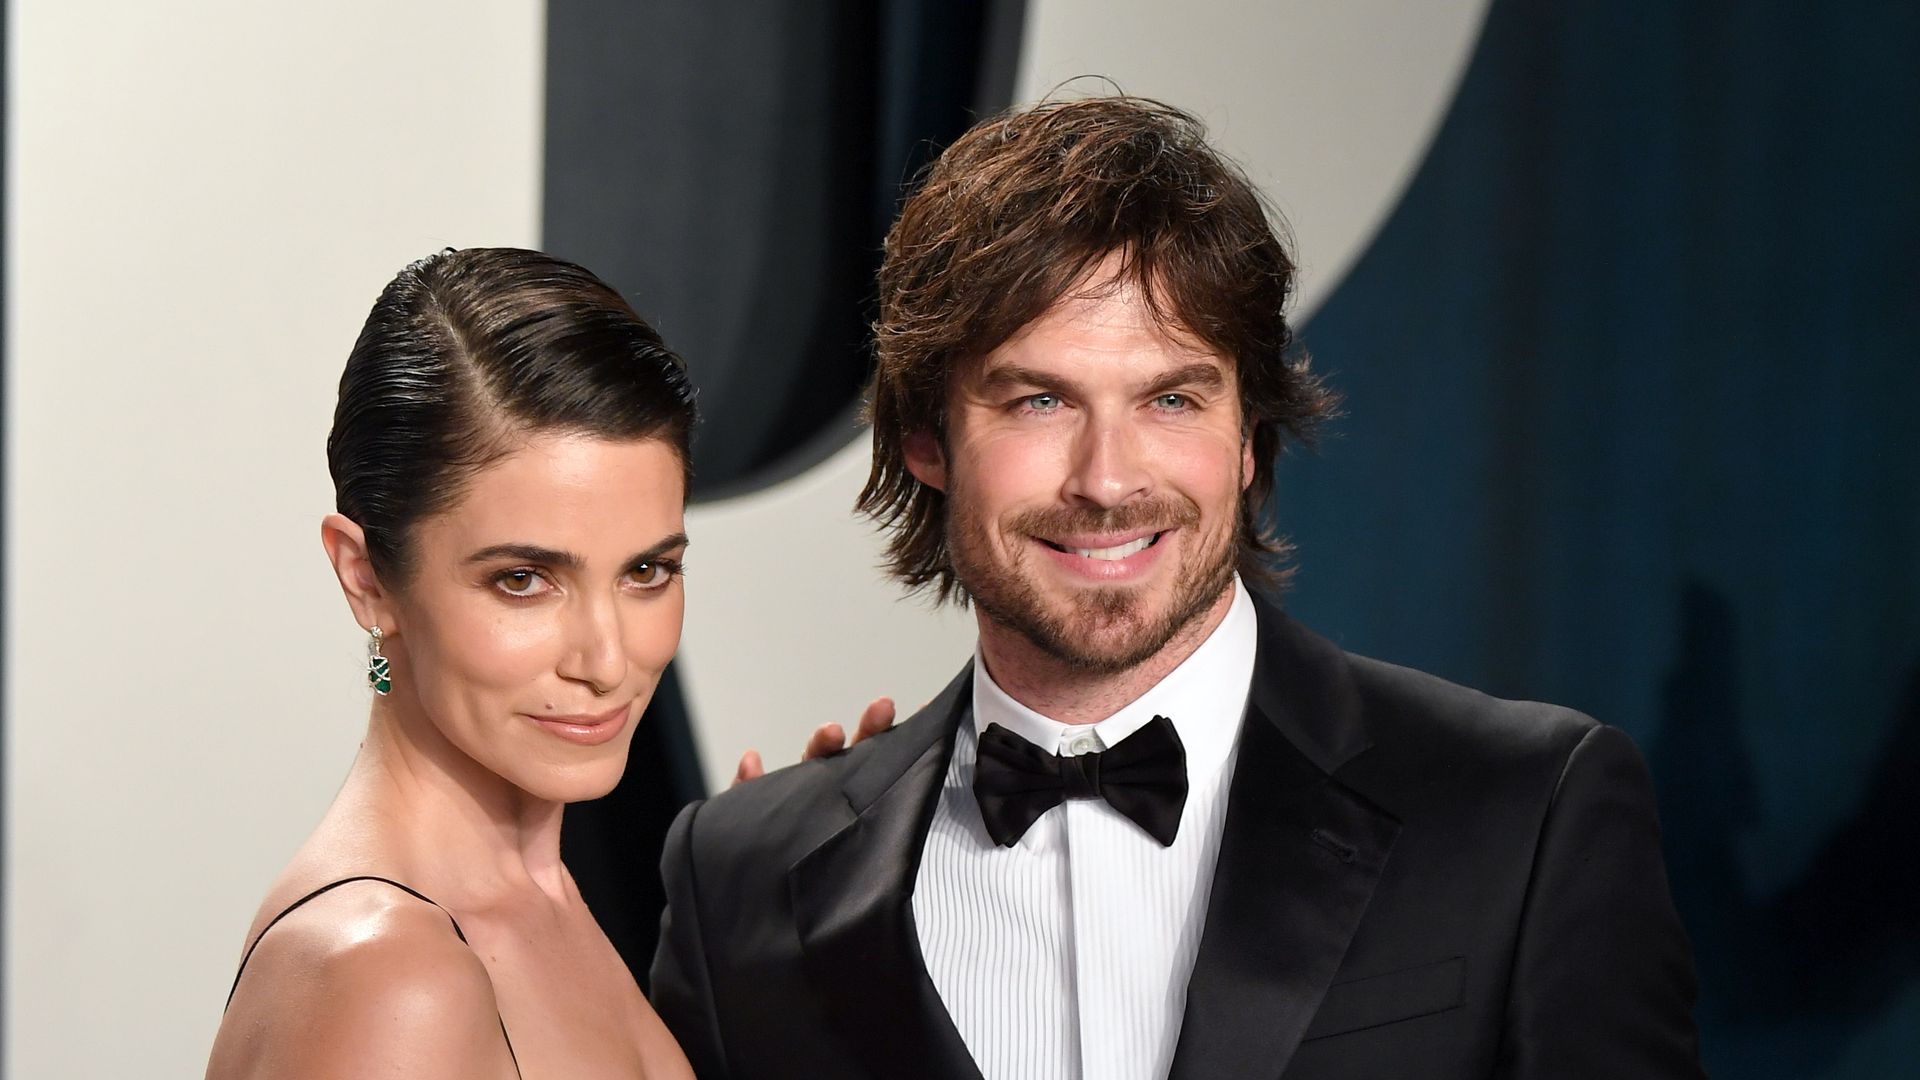 Nikki Reed and Ian Somerhalder attend the 2020 Vanity Fair Oscar Party hosted by Radhika Jones at Wallis Annenberg Center for the Performing Arts on February 09, 2020 in Beverly Hills, California